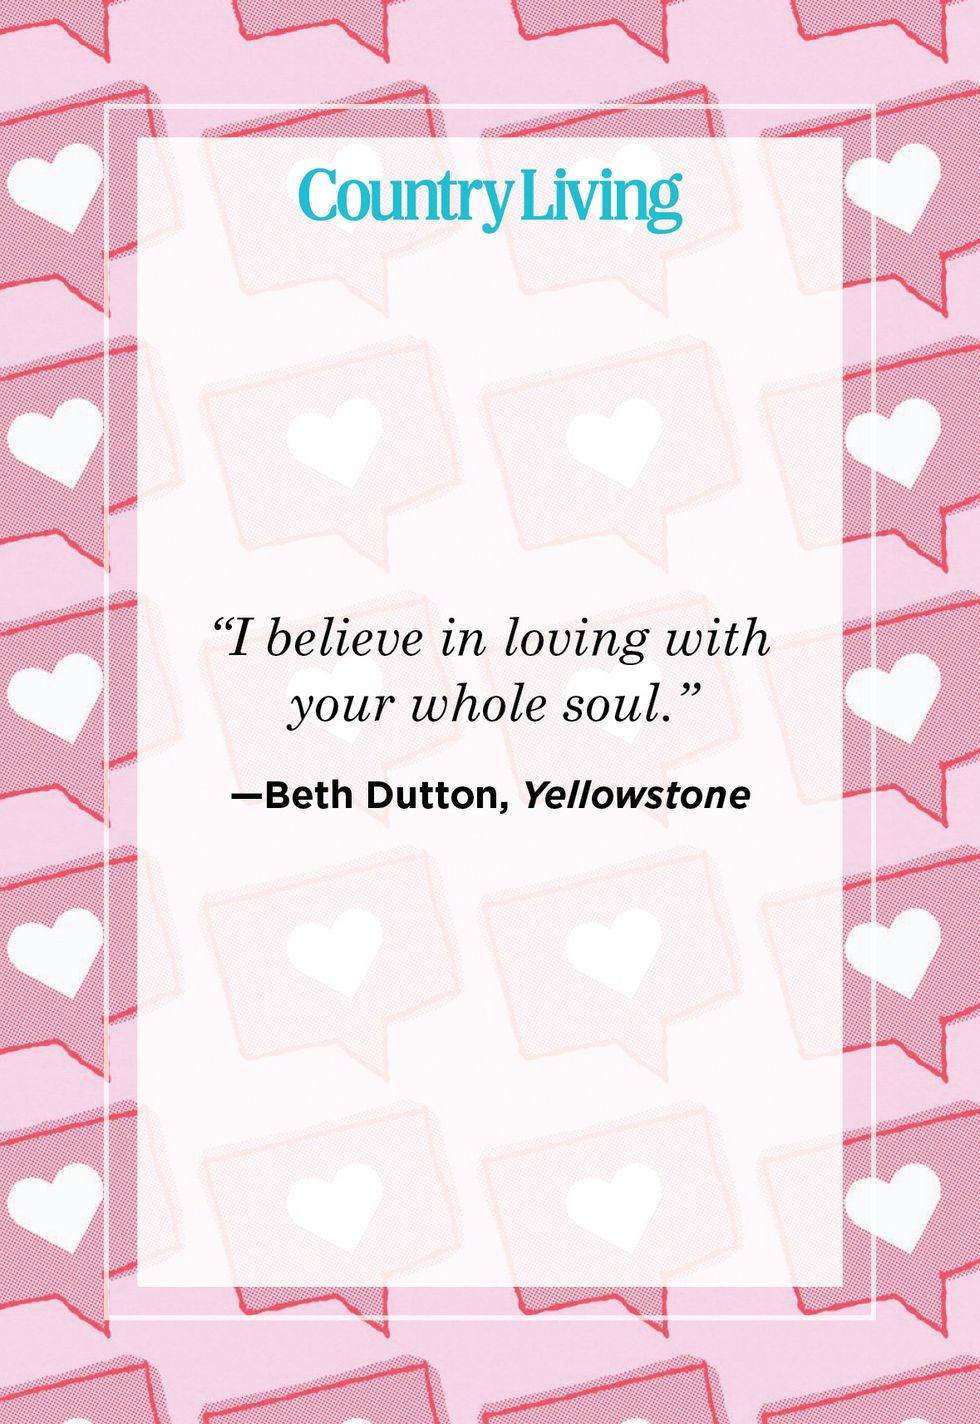 deep love quote for him spoken by beth dutton from the show yellowstone